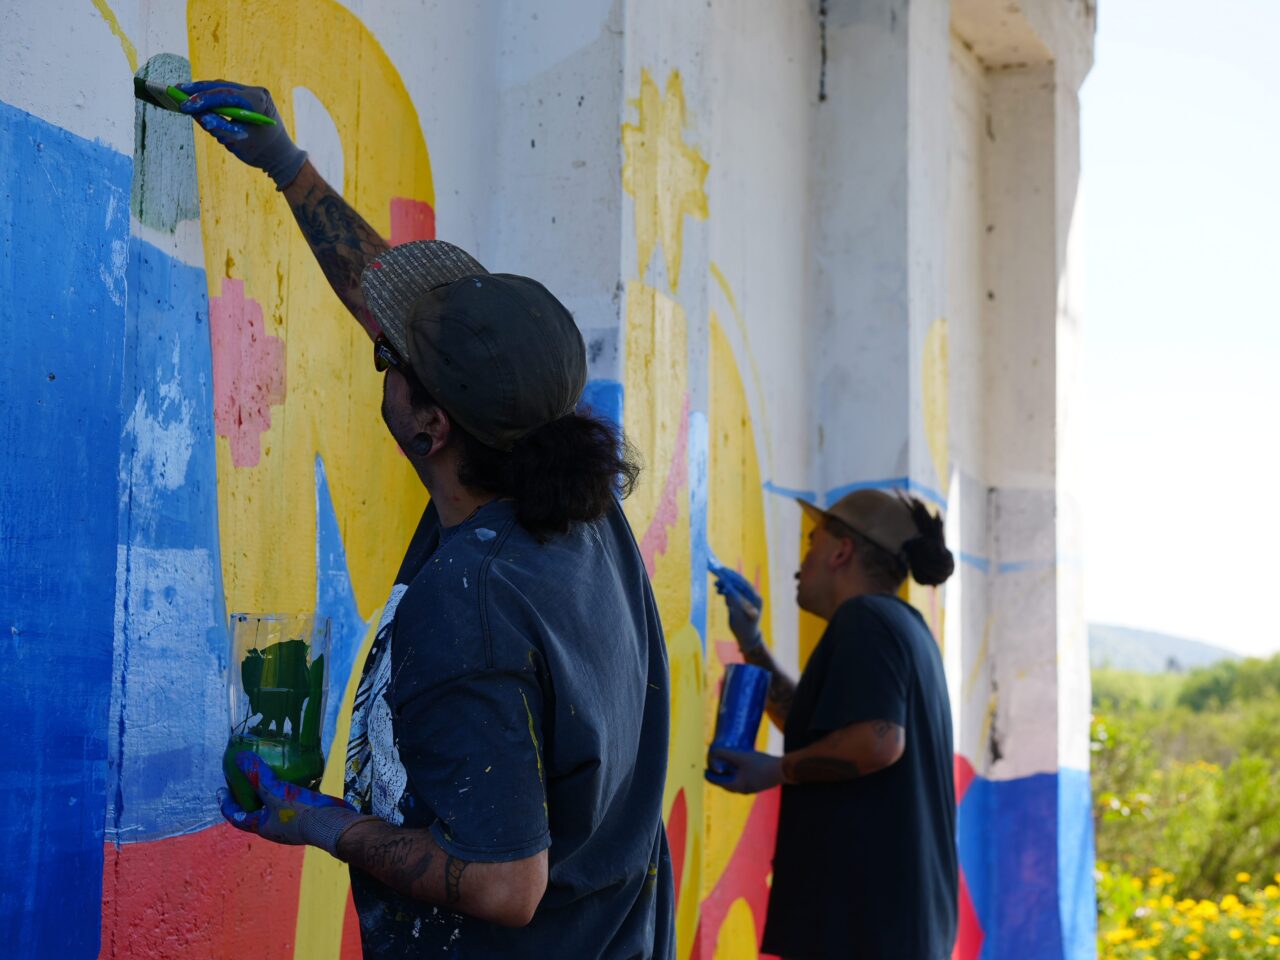 Two people painting a mural